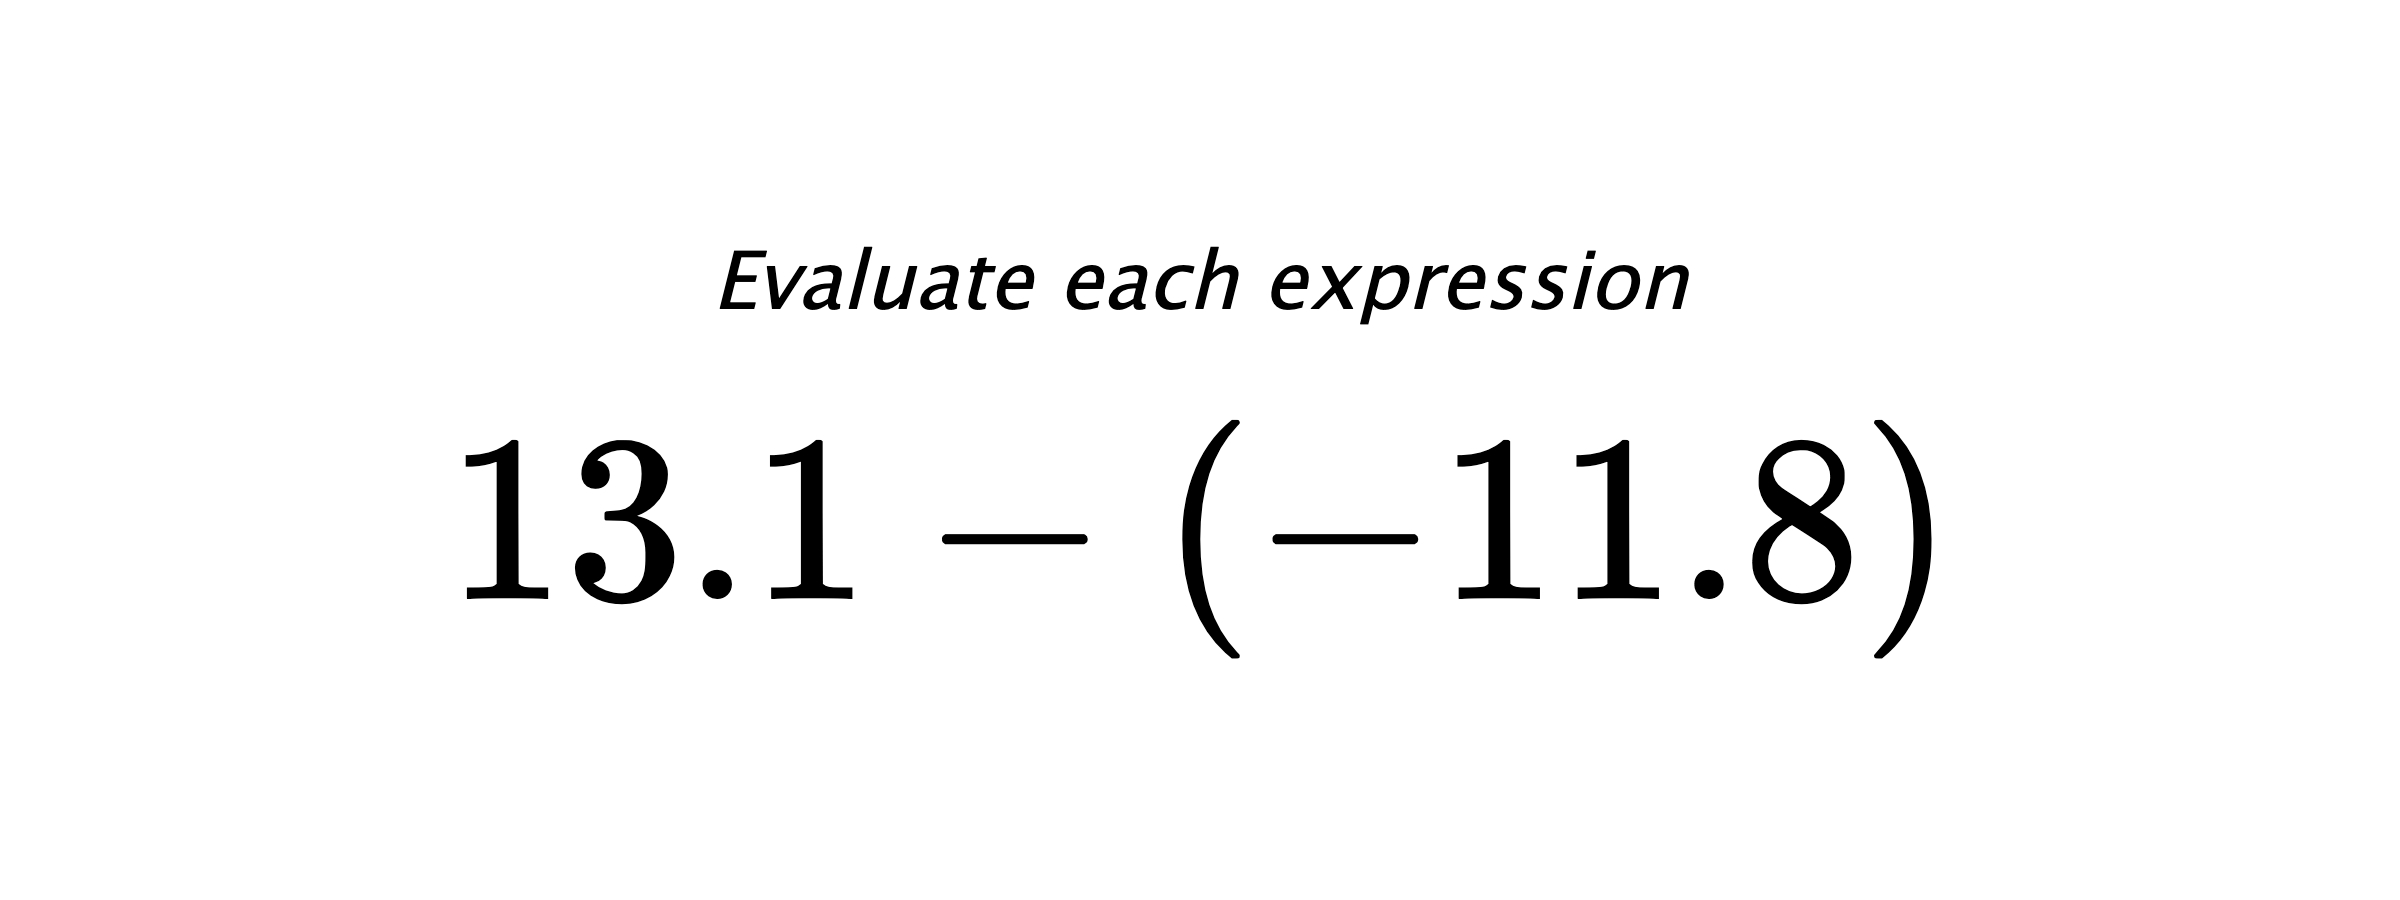 Evaluate each expression $ 13.1-(-11.8) $